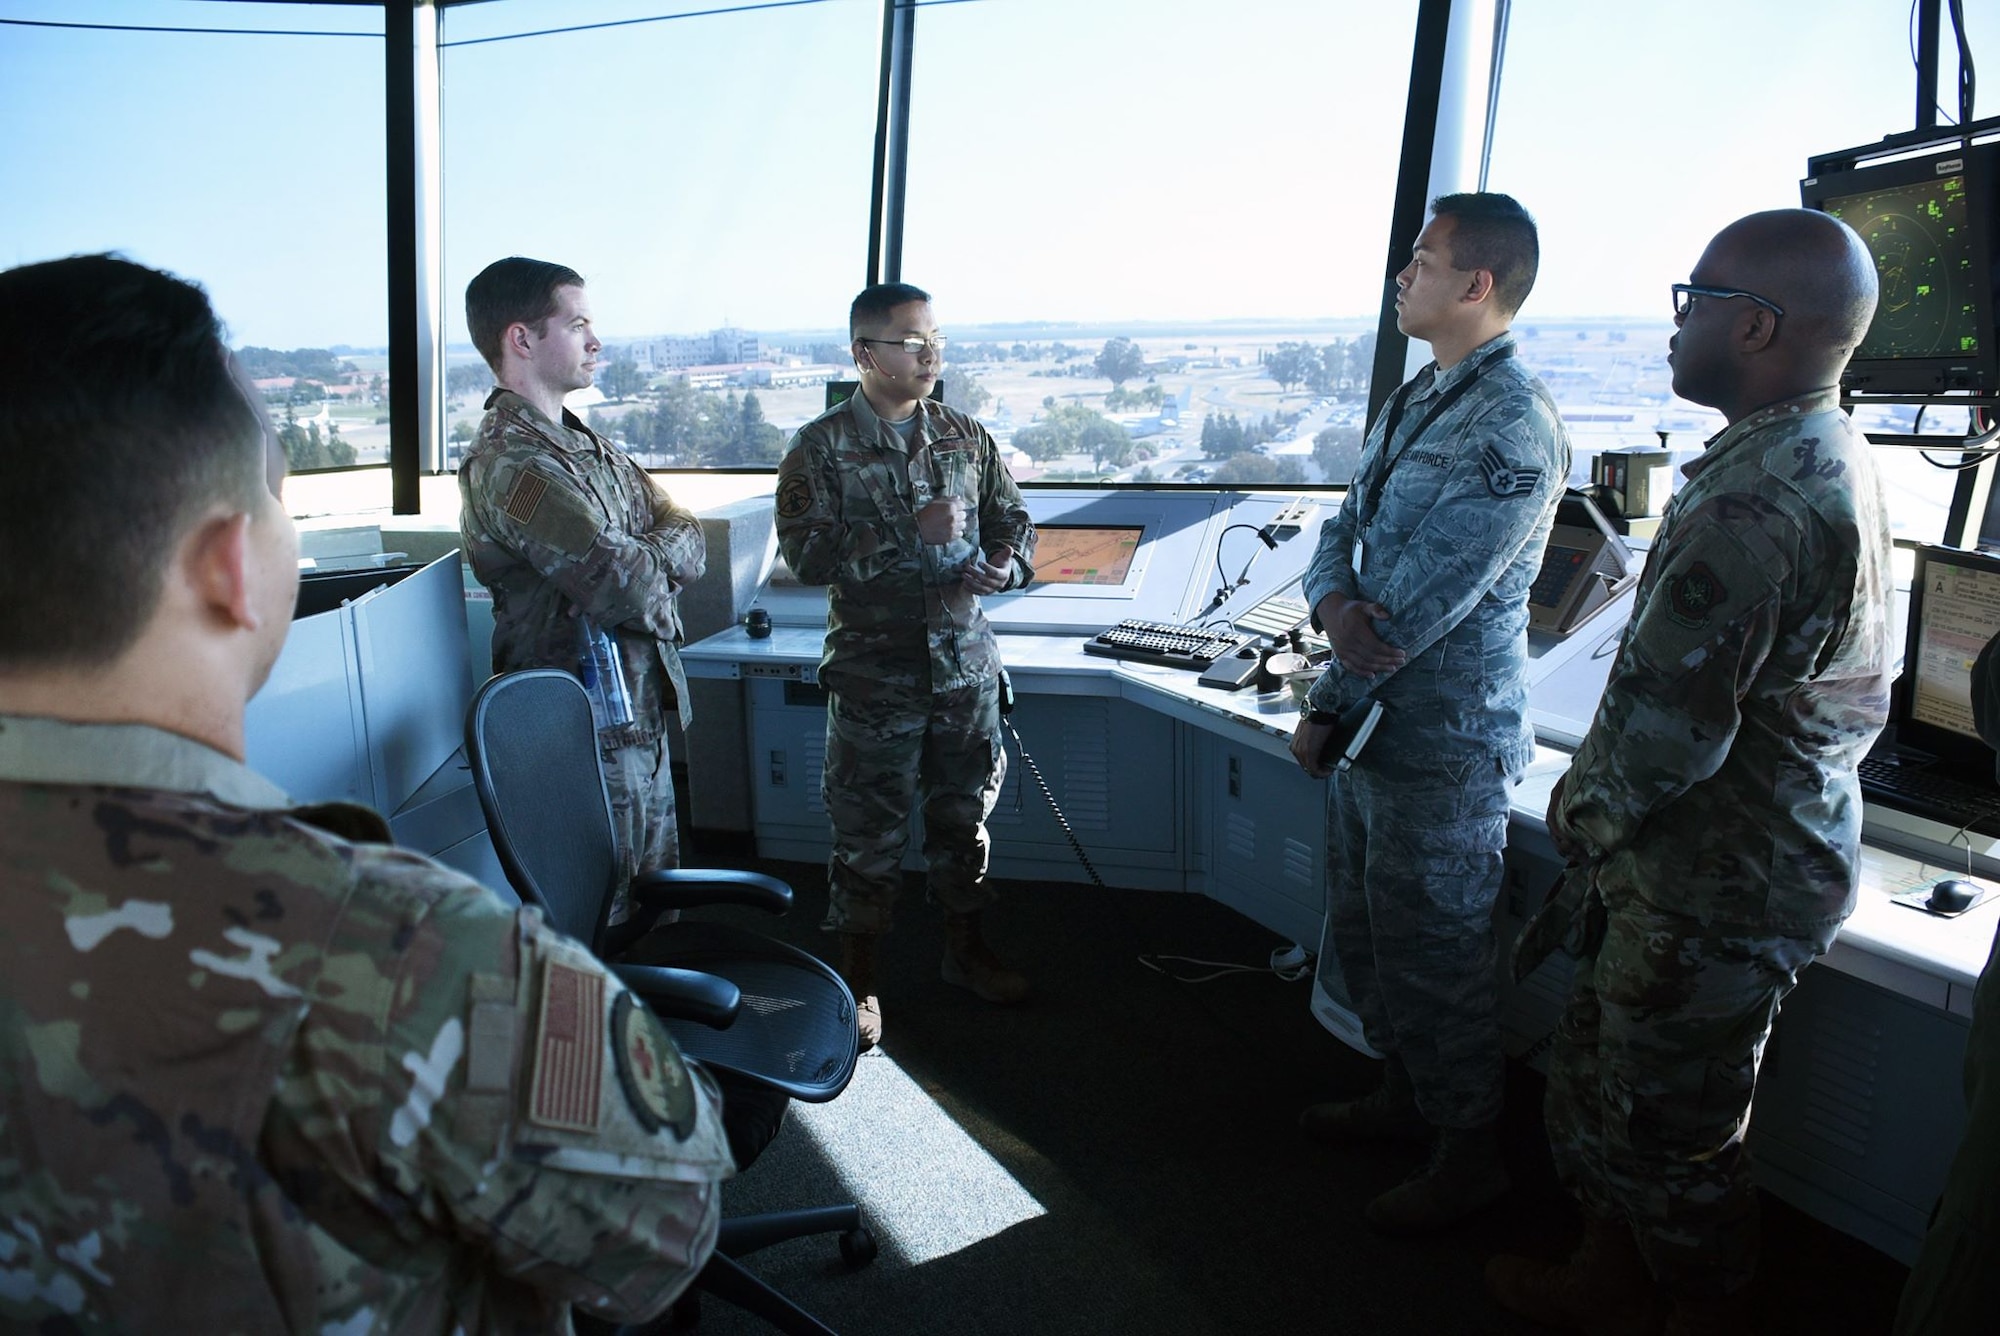 U.S. Air Force Airmen from the 60th Operations Support Squadron show participants of an Airman enrichment day the normal tasks carried out by air traffic control tower personnel on a daily basis June14, 2019, at Travis Air Force Base, California. The Airman enrichment day was the first of its kind in the Air Force and exposed Airmen of different units to the jobs and mission contributions of other Air Force jobs. (U.S. Air Force photo by Senior Airman Christian Conrad)